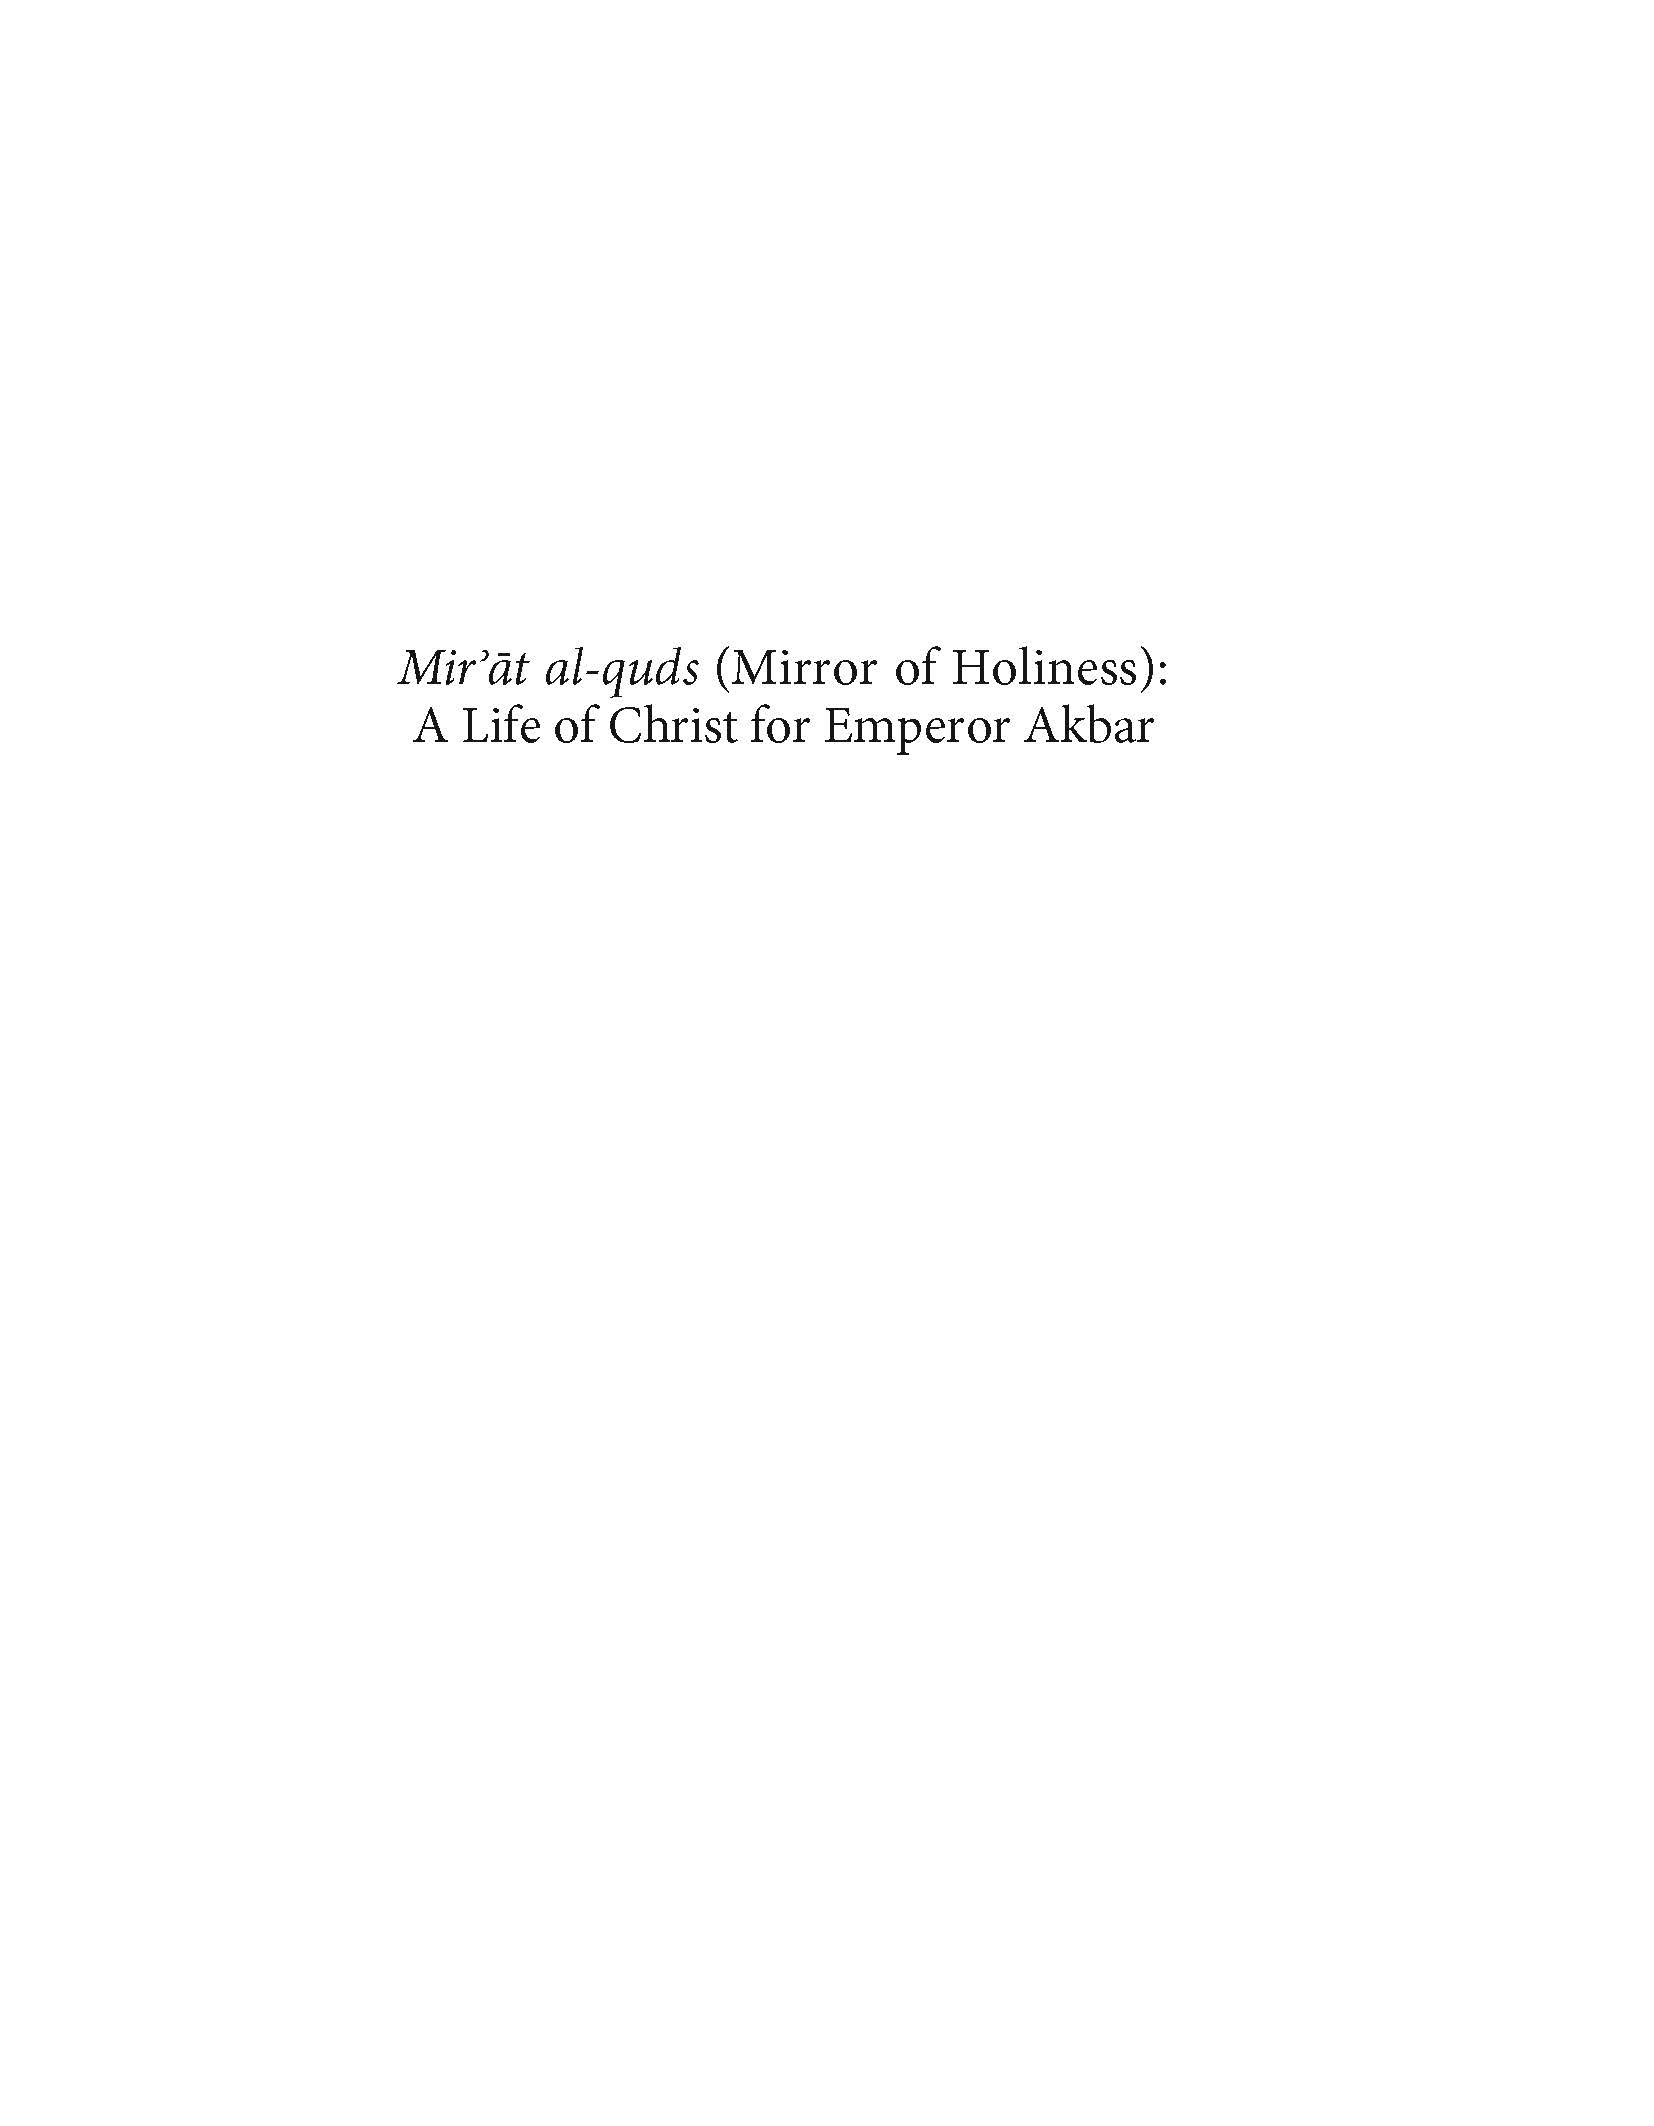 Karen Leal - This study examines the&nbsp;<span style="font-style: italic;">Mir'at al-Quds (Mirror of Holiness)</span>, an account of the life of Christ written by a Jesuit missionary to the court of Mughal Emperor Akbar, who took an interest in Christianity. Three illustrated copies exist, the most important of which is in the Cleveland Museum of Art and forms the basis of this study. The text, originally in Persian, is translated to English for the first time by Wheeler M. Thackston. This study is part of the series&nbsp;<span style="font-style: italic;">Studies and Sources on Islamic Art and Architecture: Supplements to Muqarnas</span>, Volume XII.